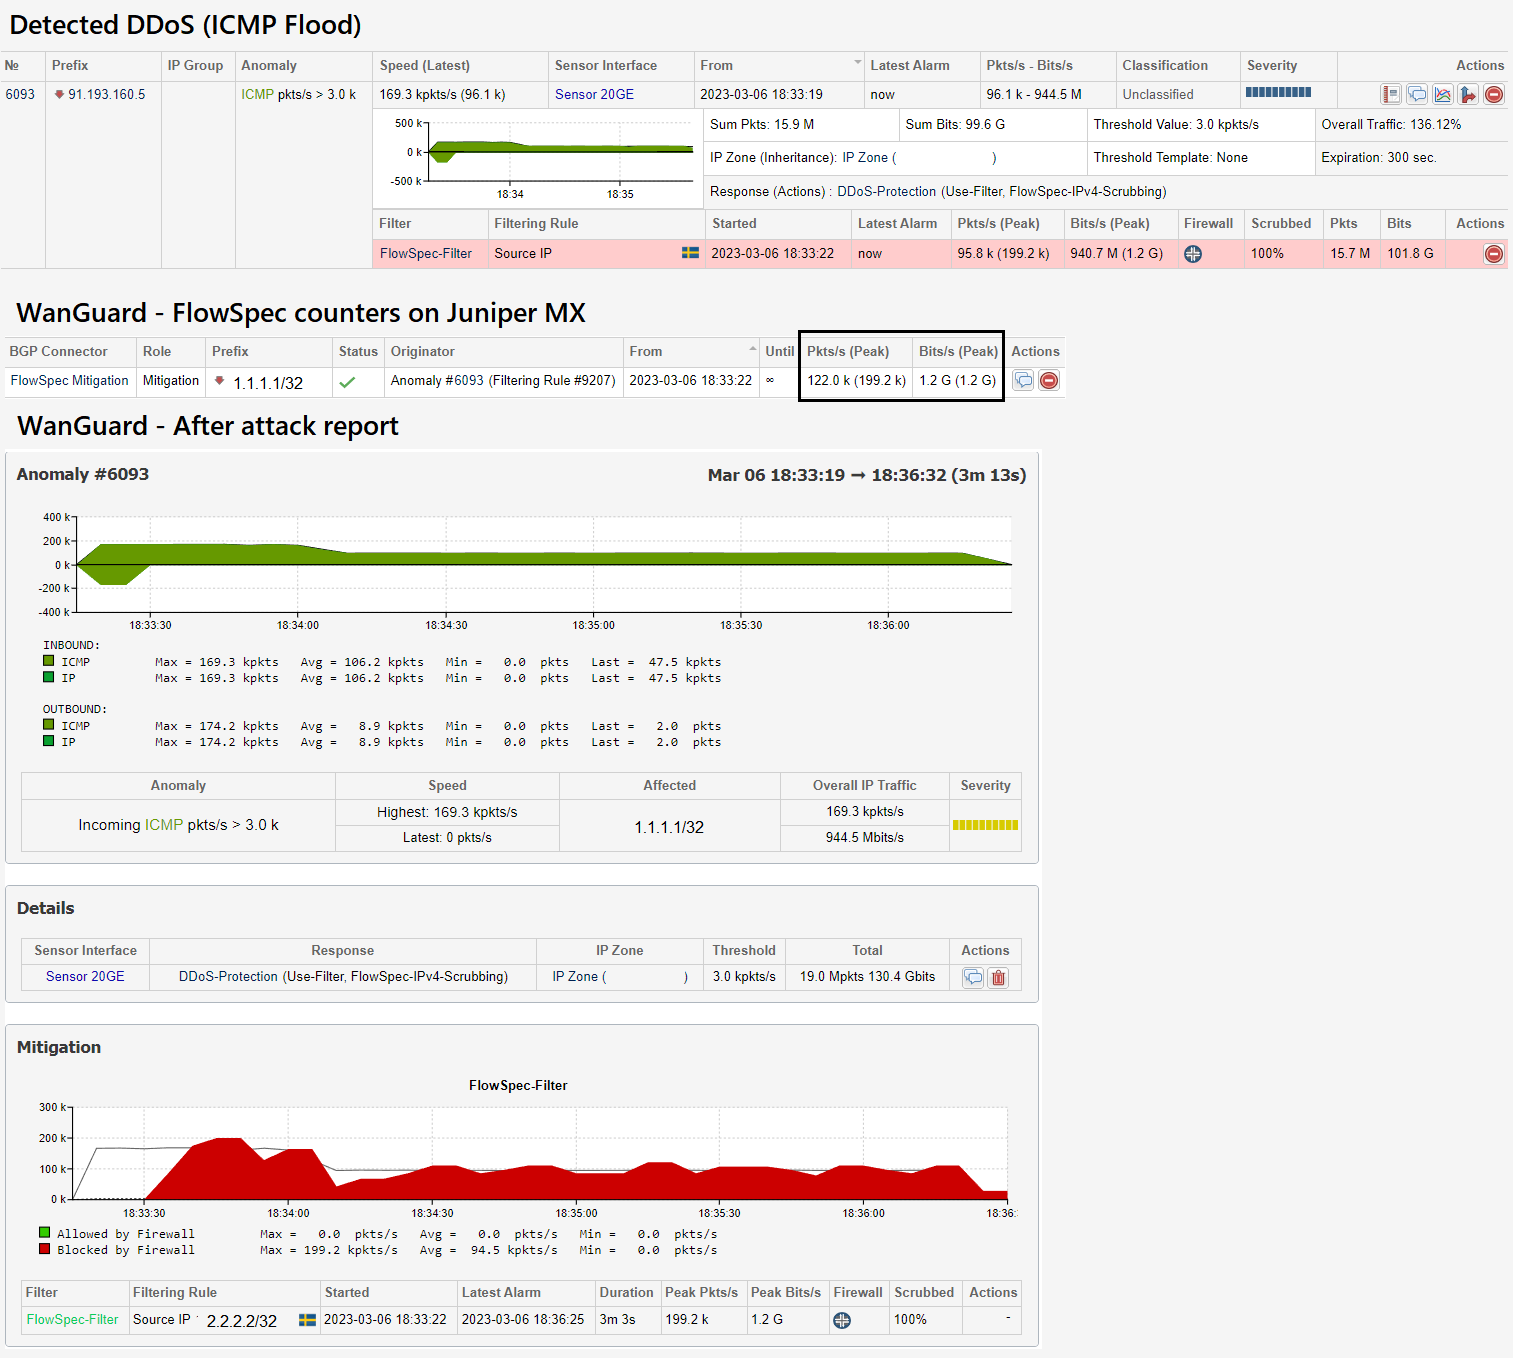 WanGuard DDoS report with FlowSpec counters